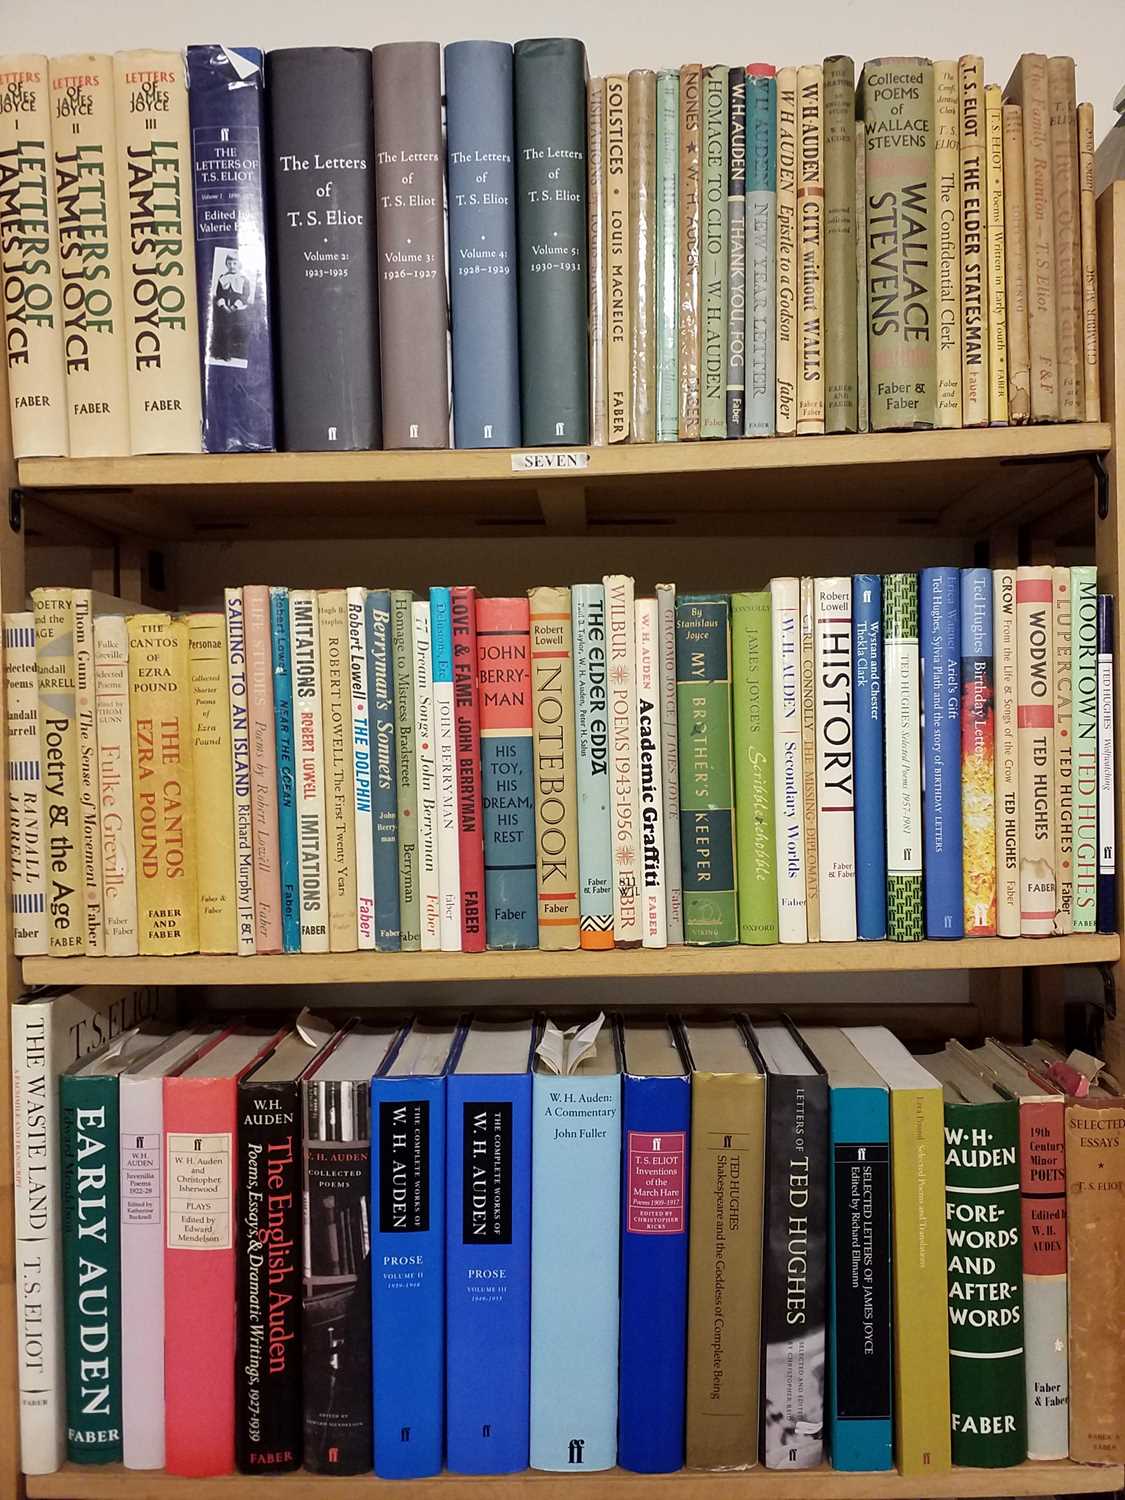 Lot 419 - Faber & Faber. A large collection of Faber & Faber poetry & literature